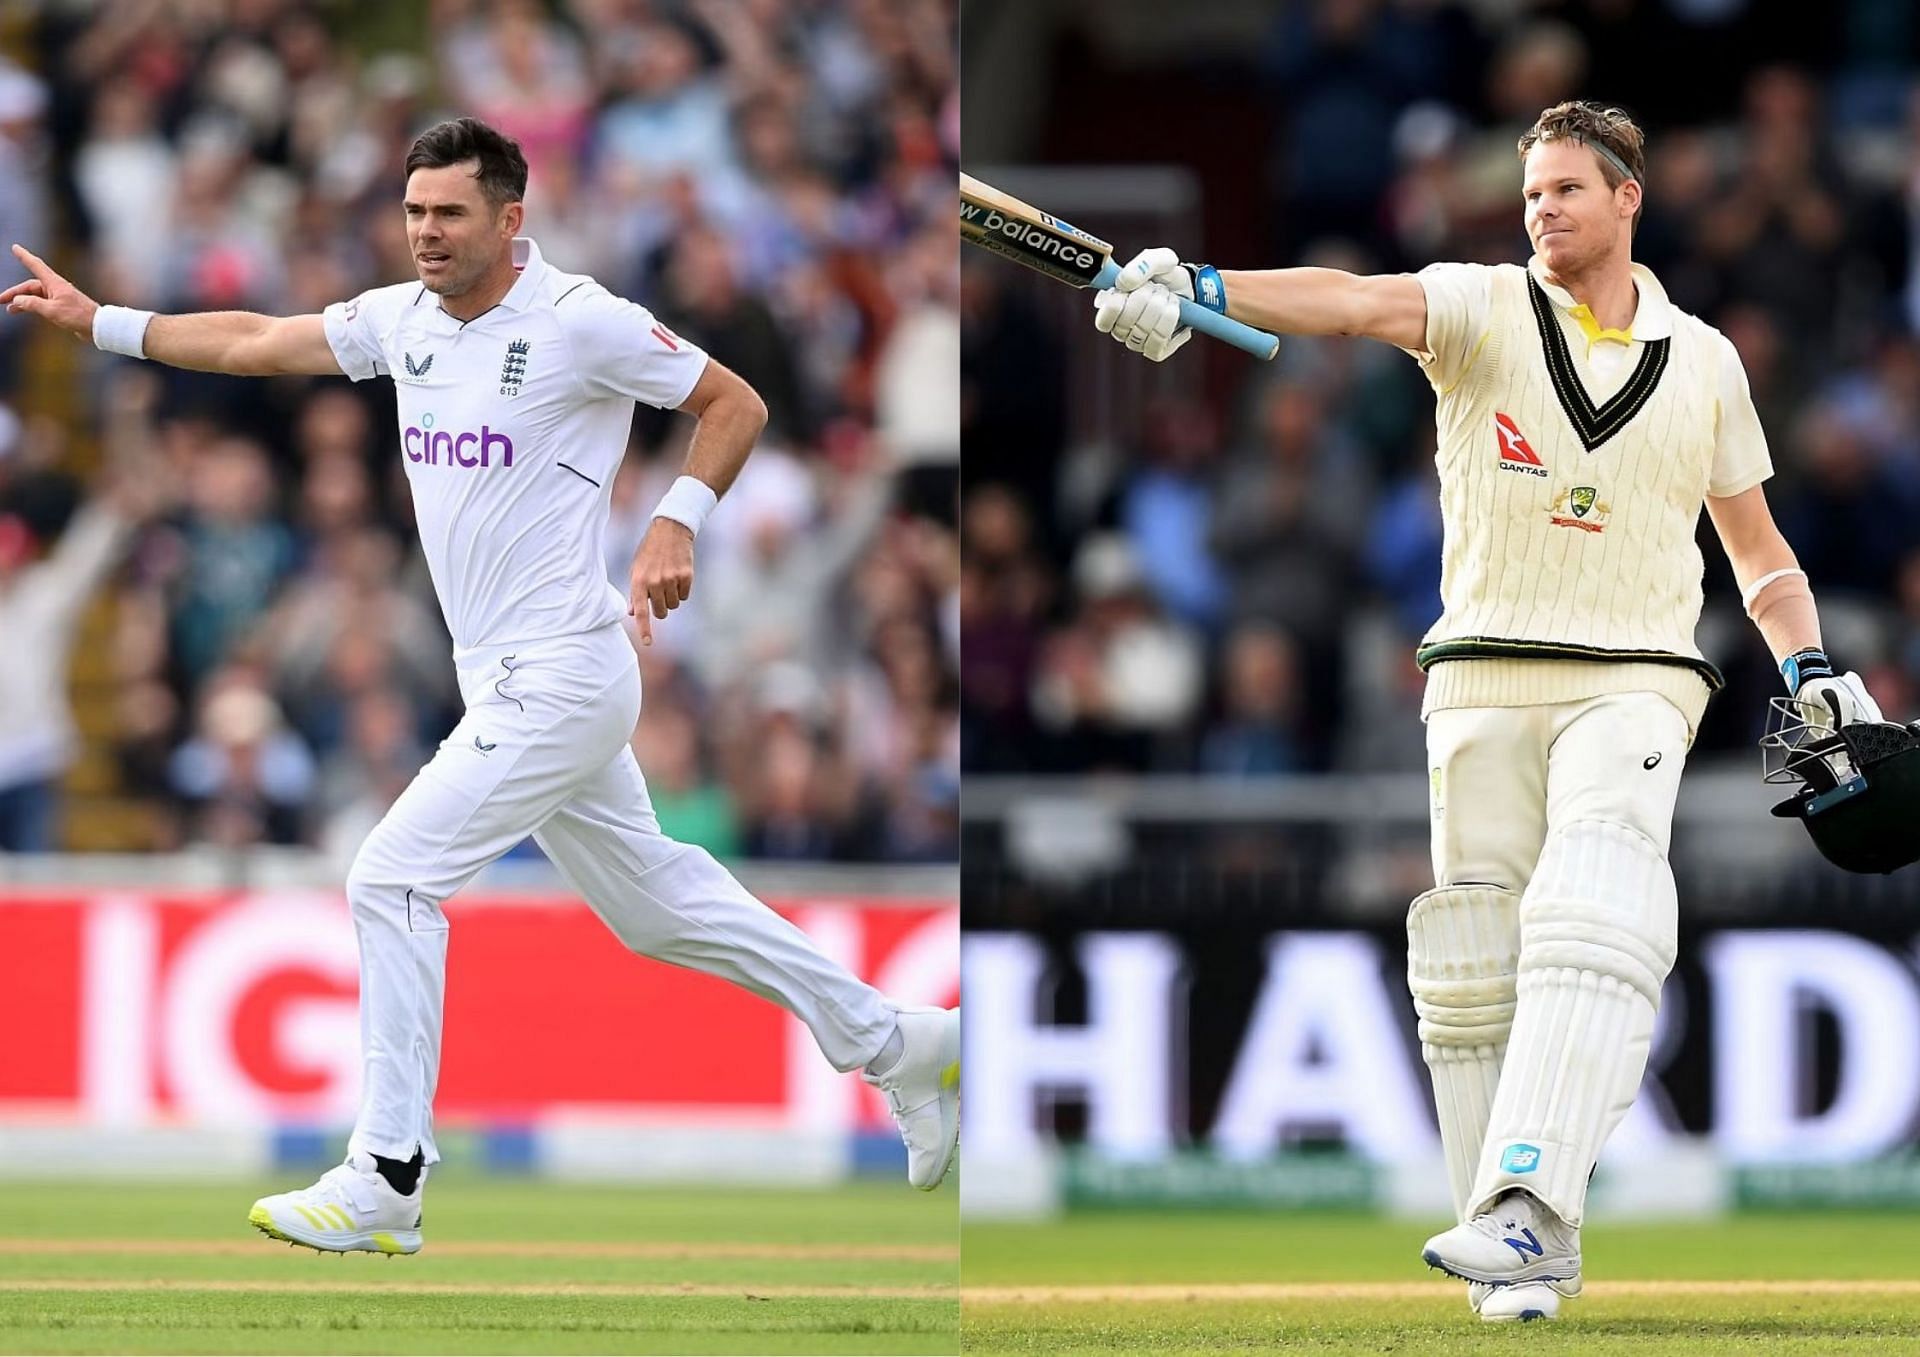 James Anderson and Steve Smith will go up against each other again in a battle for the urn!